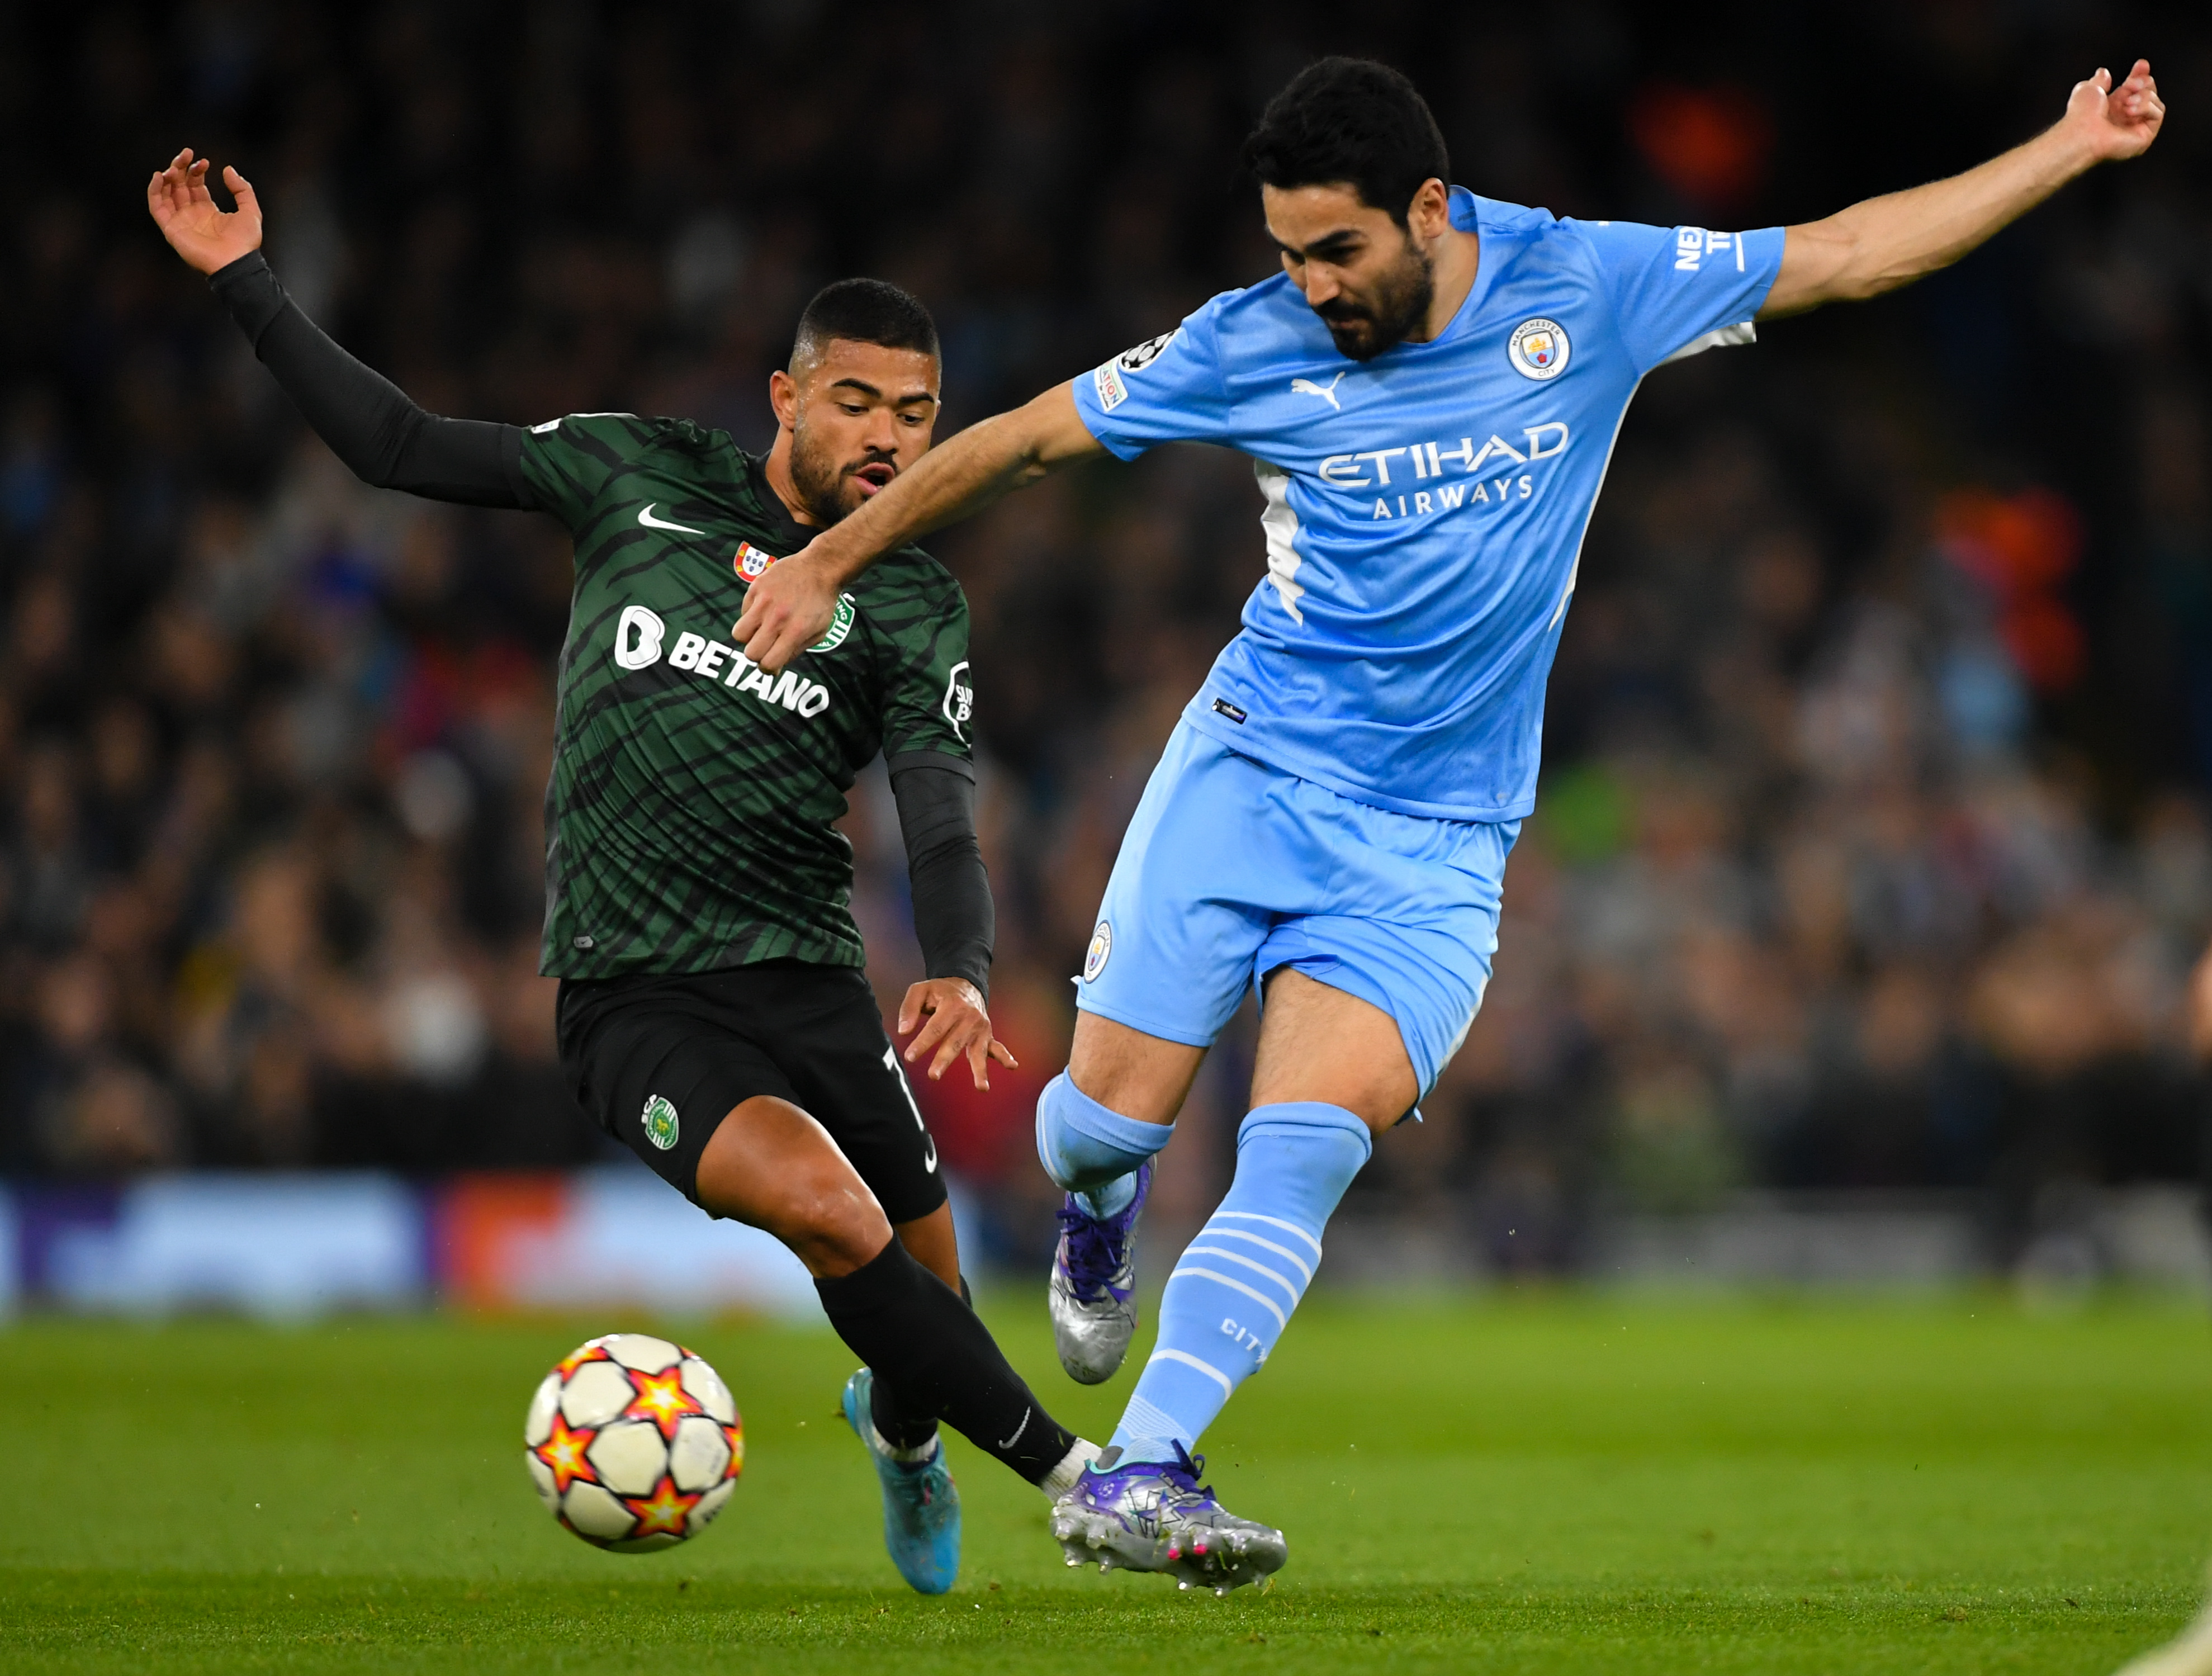 Manchester City 0-0 Sporting: Man City advance to the Champions League quarterfinals despite a 0-0 draw against Sporting in the 2nd Leg; MCI 5-0 SPO Agg